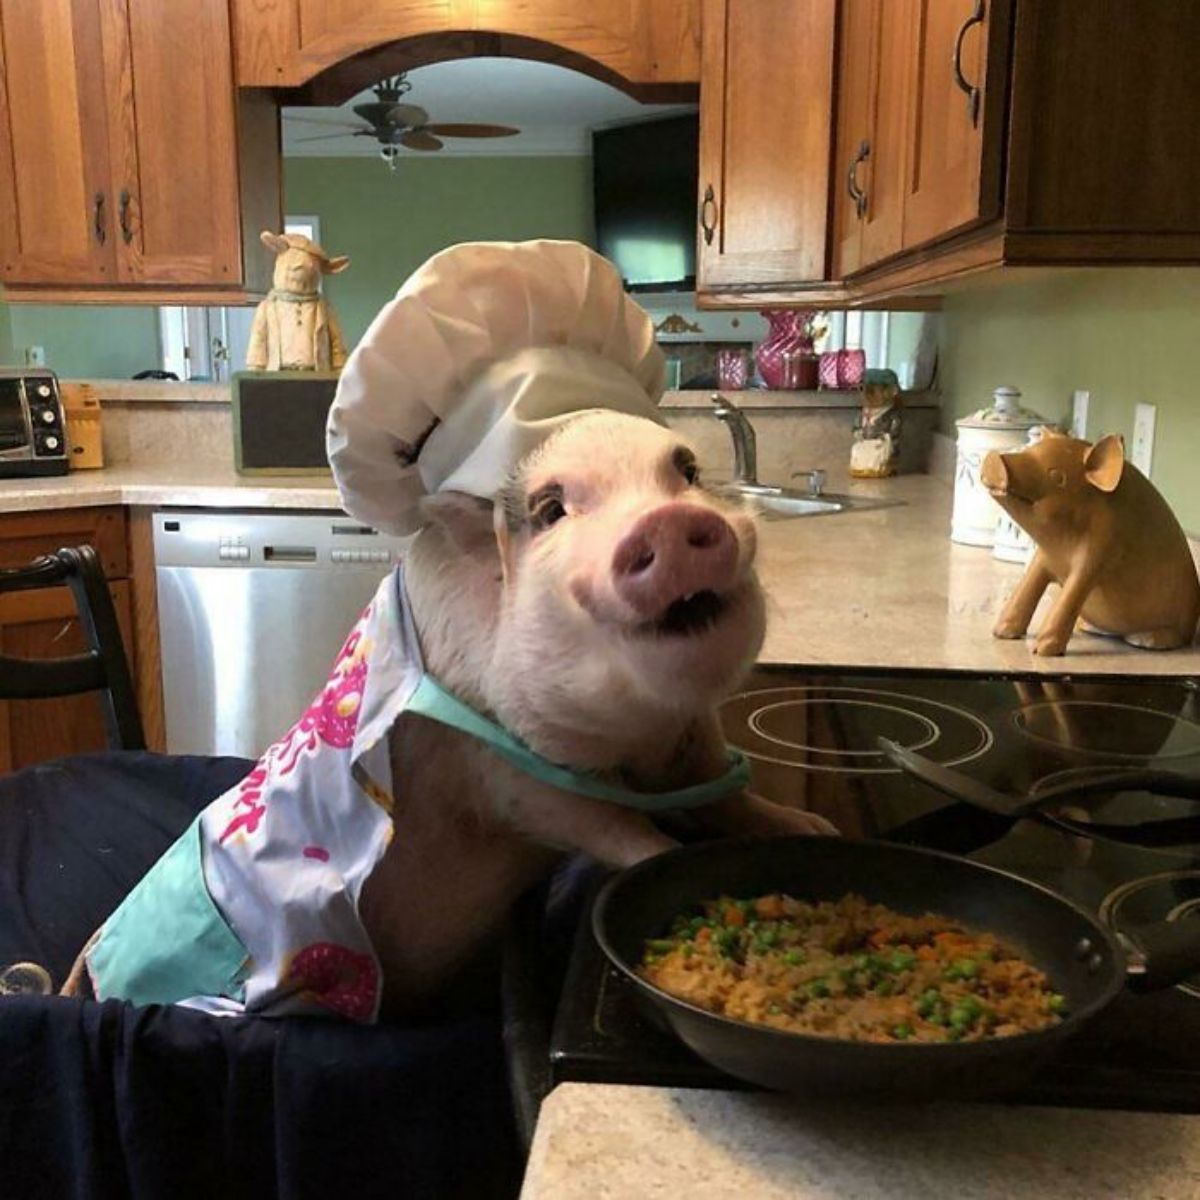 pink pig wearing a chef's hat and an apron standing at a kitchen counter over a pan of food